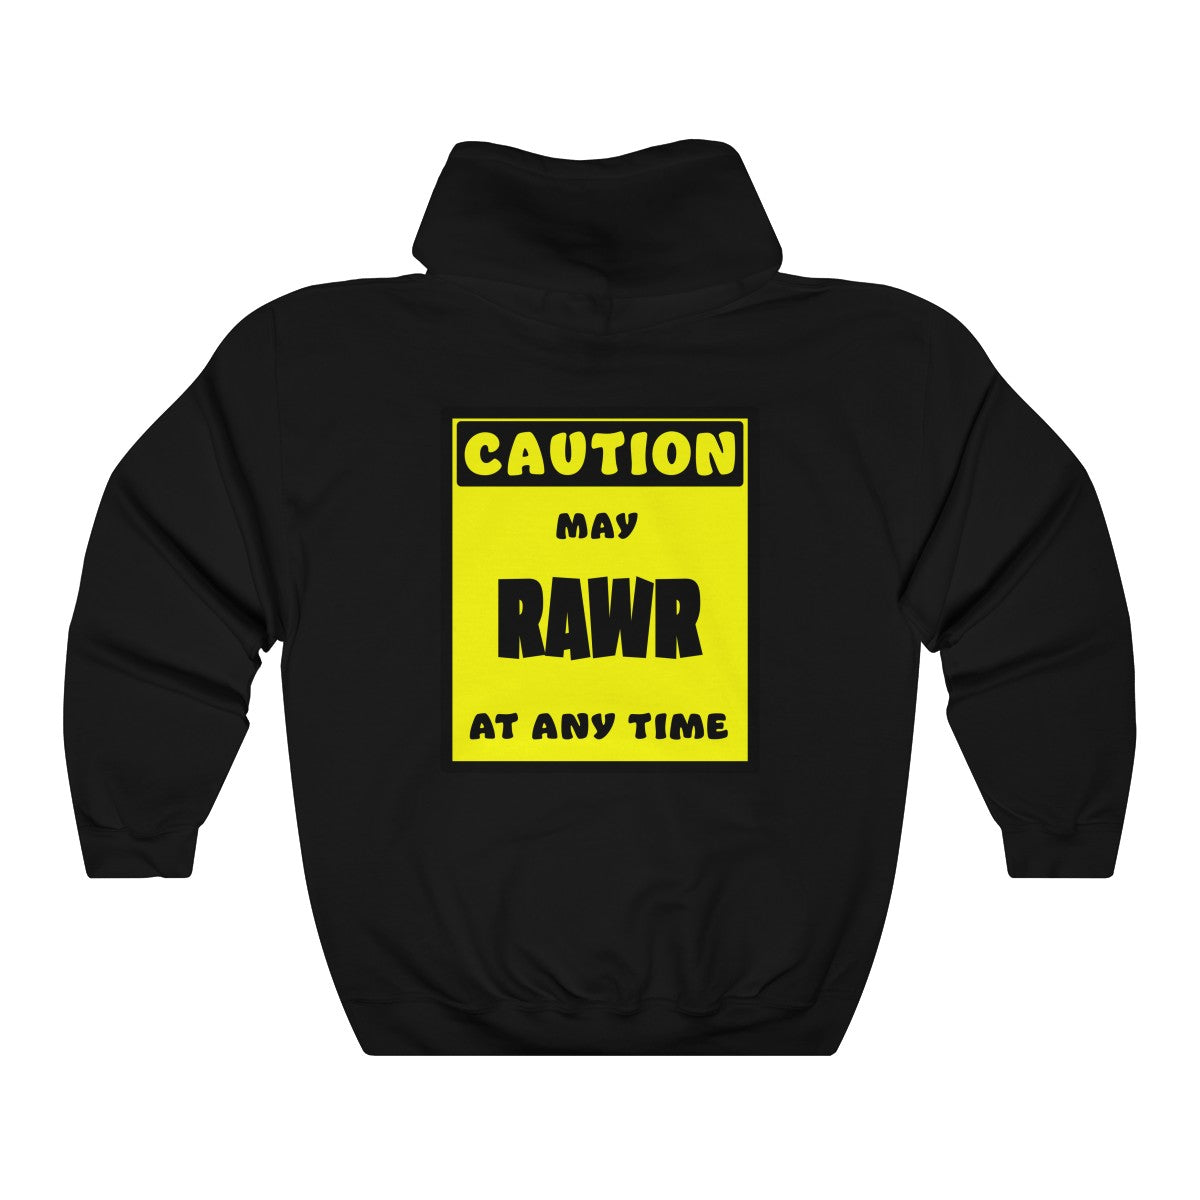 CAUTION! May RAWR at any time! - Hoodie Hoodie AFLT-Whootorca Black S 